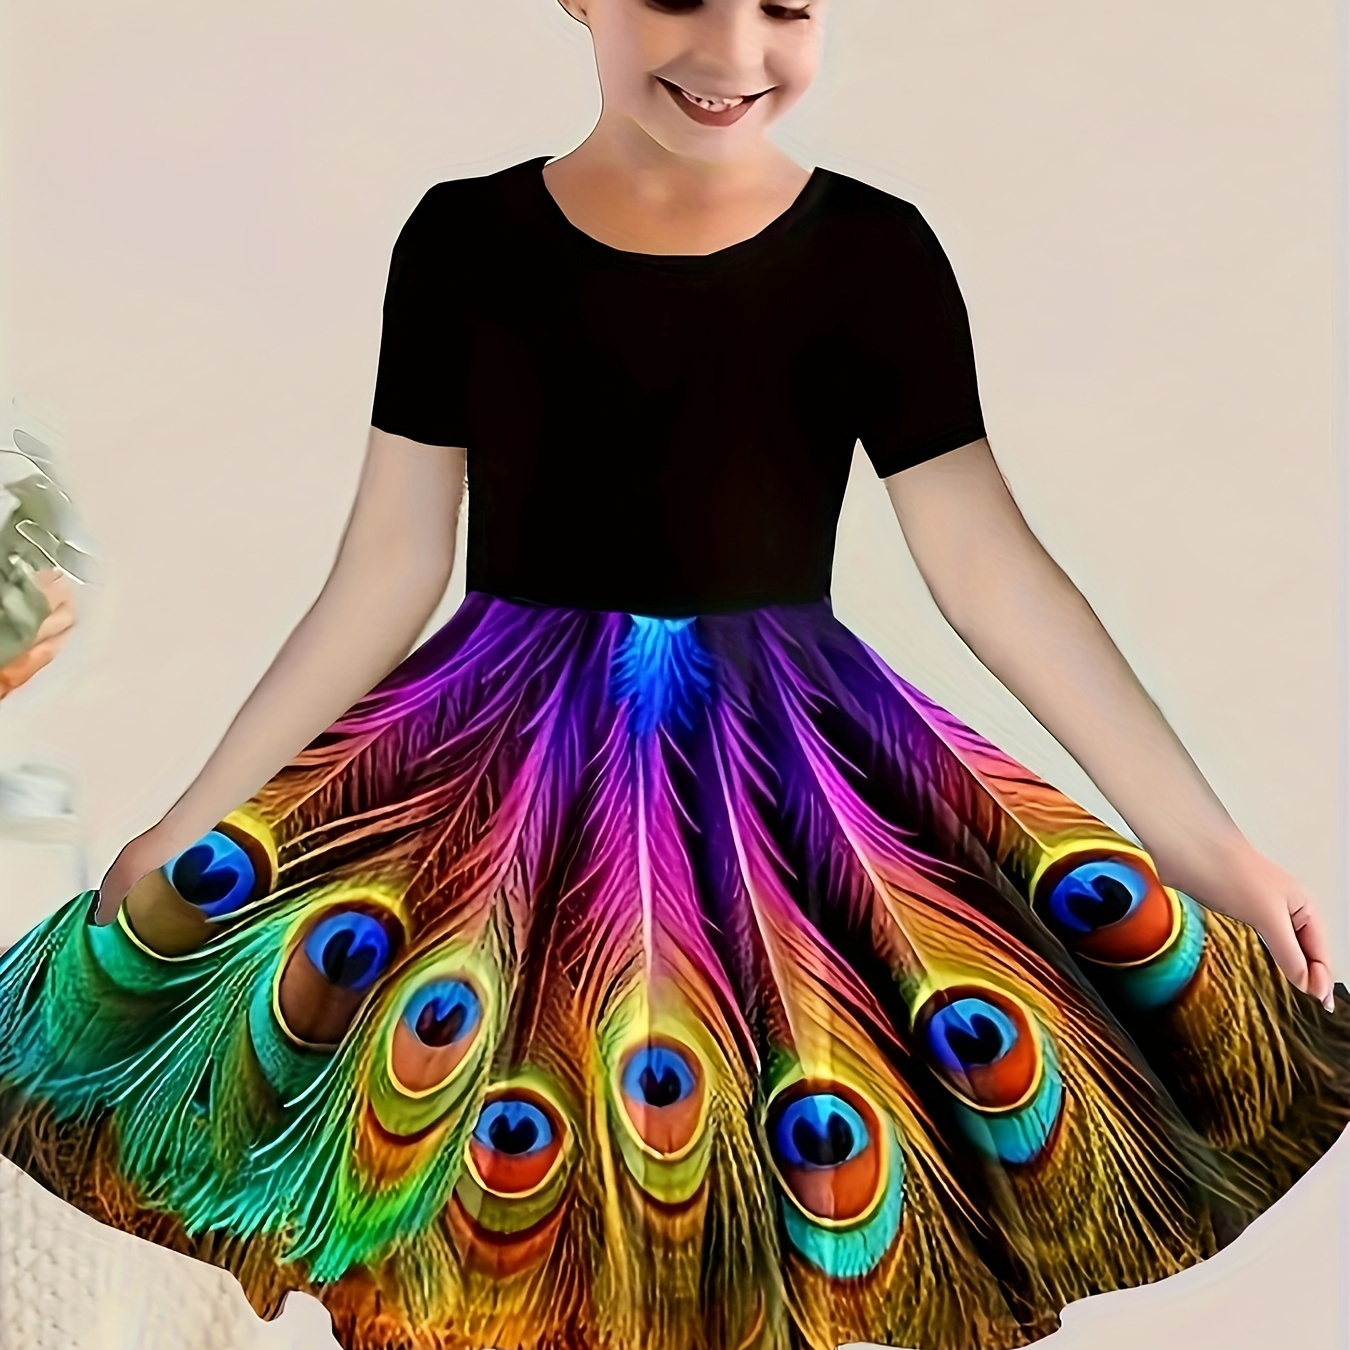 

3d Peacock Feather Print Dress, Girls Casual Splicing Crew Neck Dresses For Summer Party